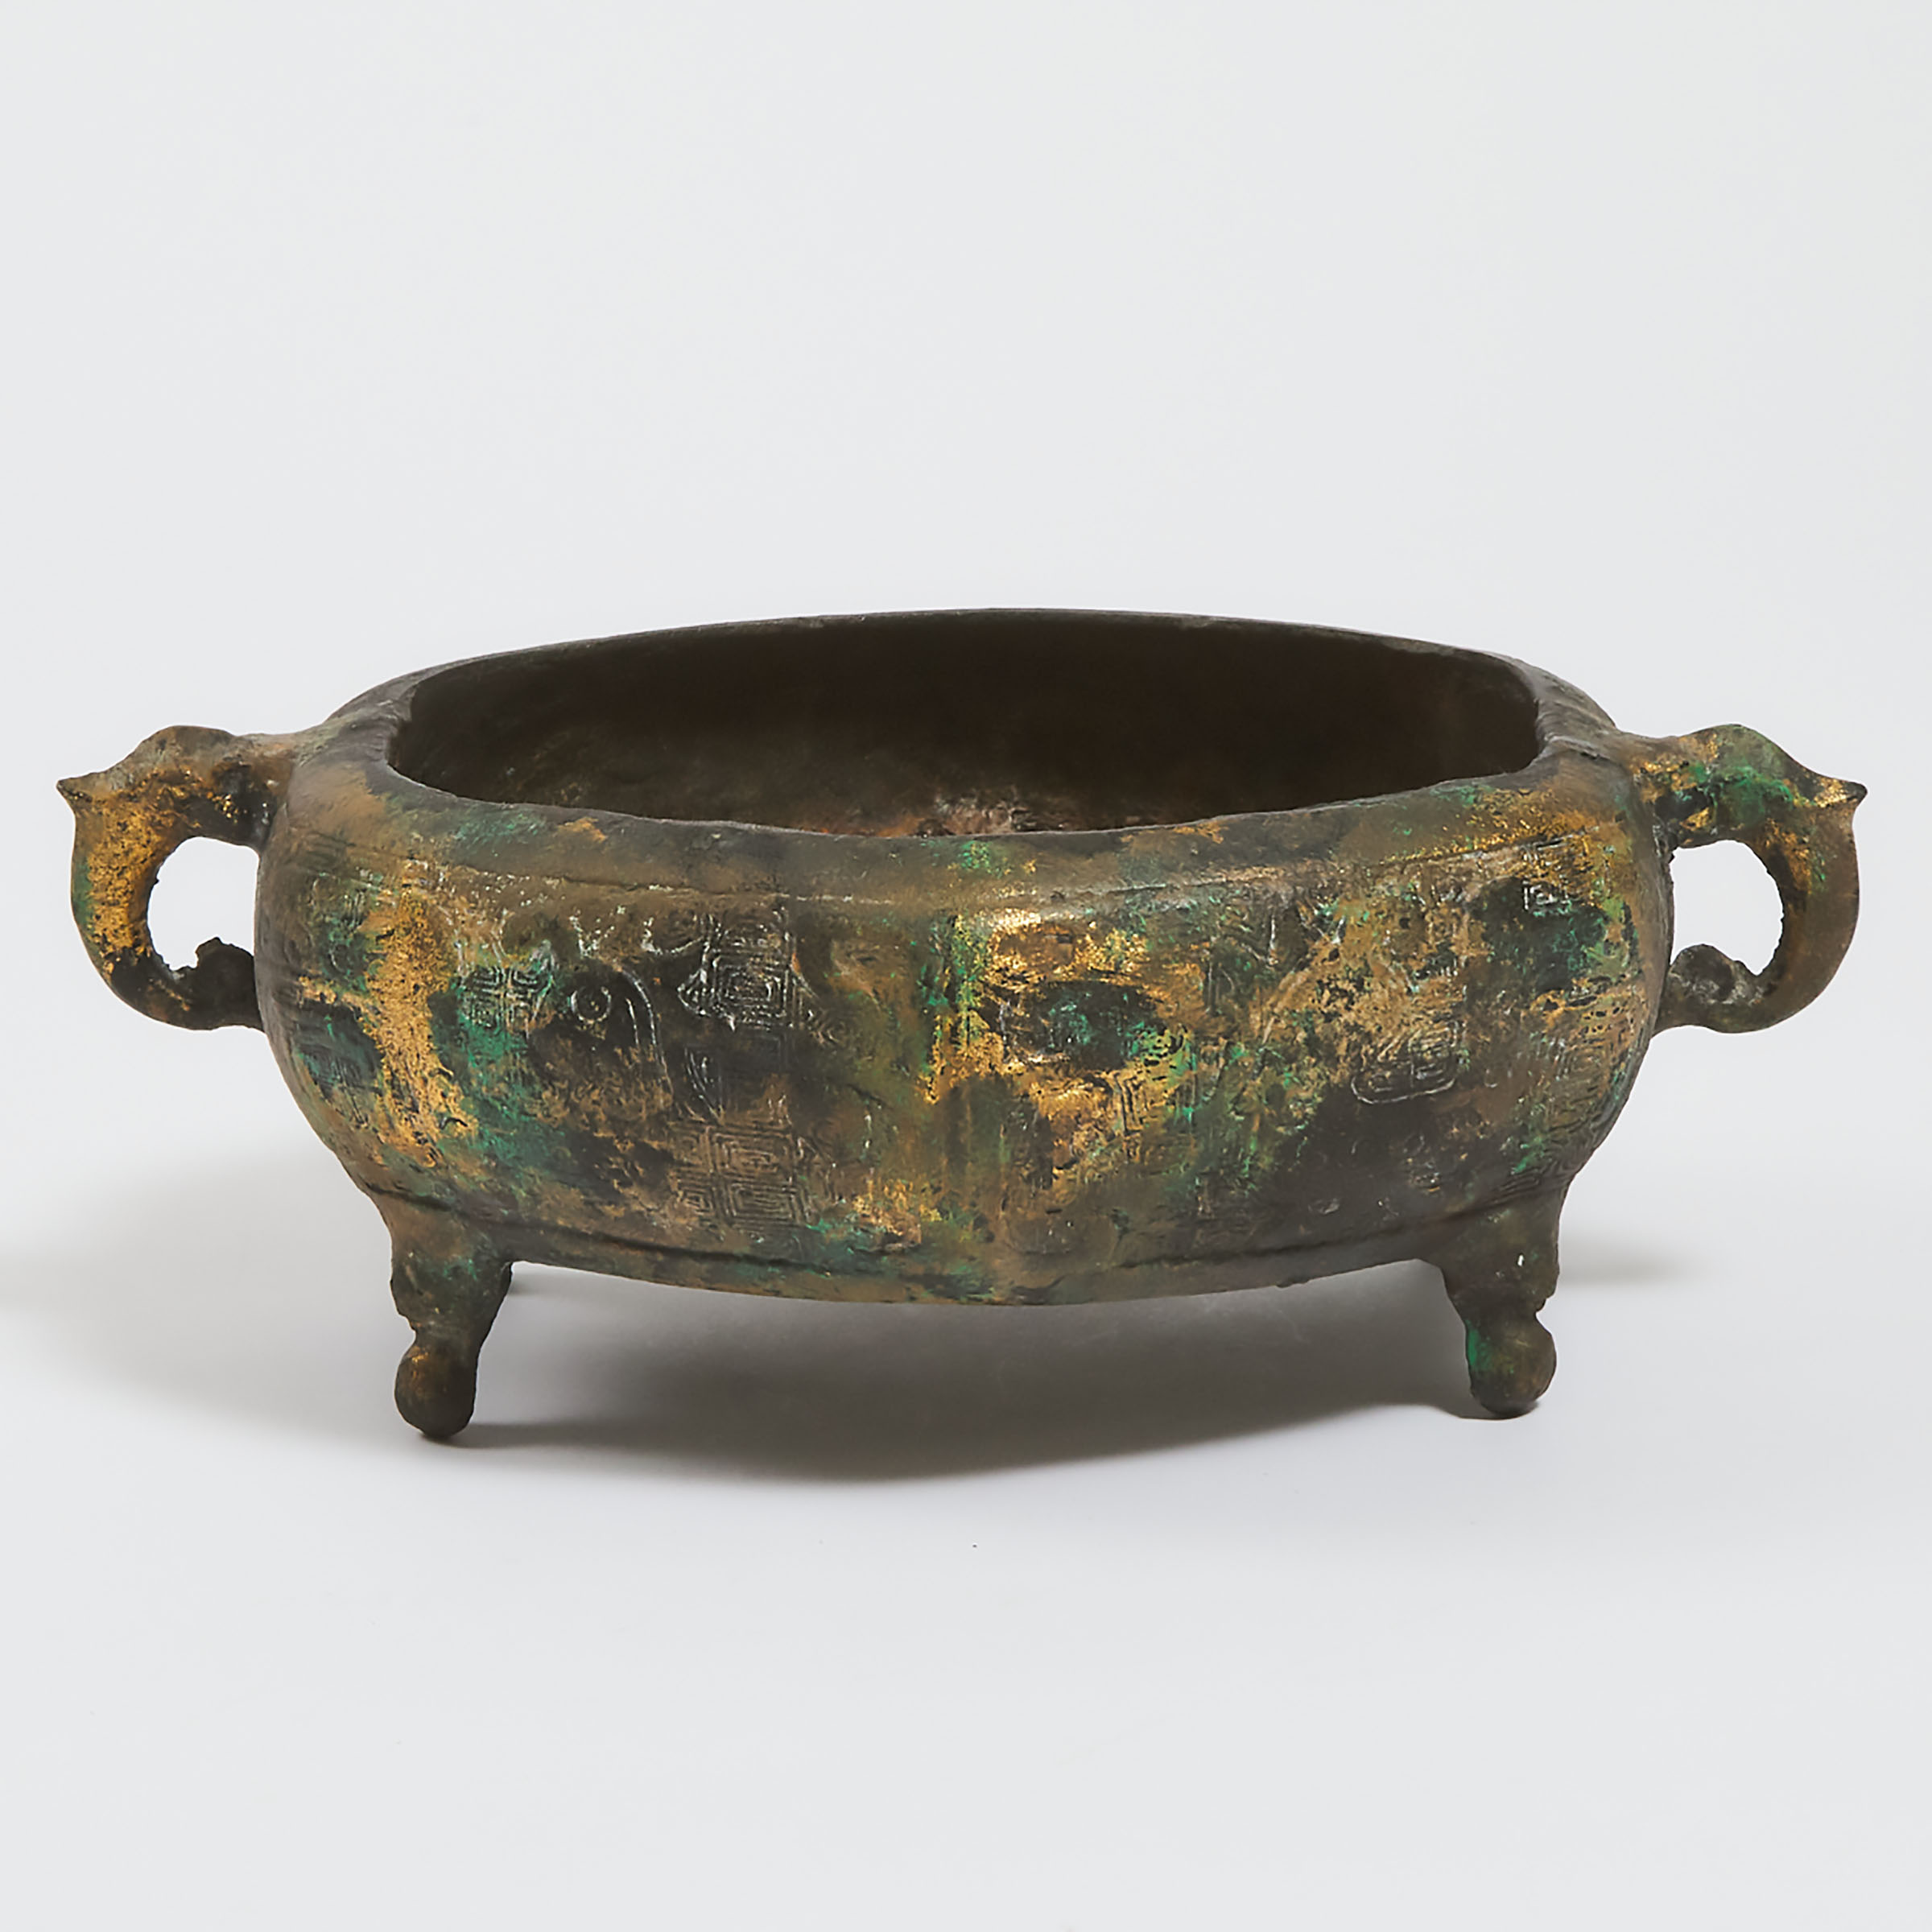 A Bronze Four-Legged Ritual Vessel, Possibly Southeast Asia, 18th Century or Later